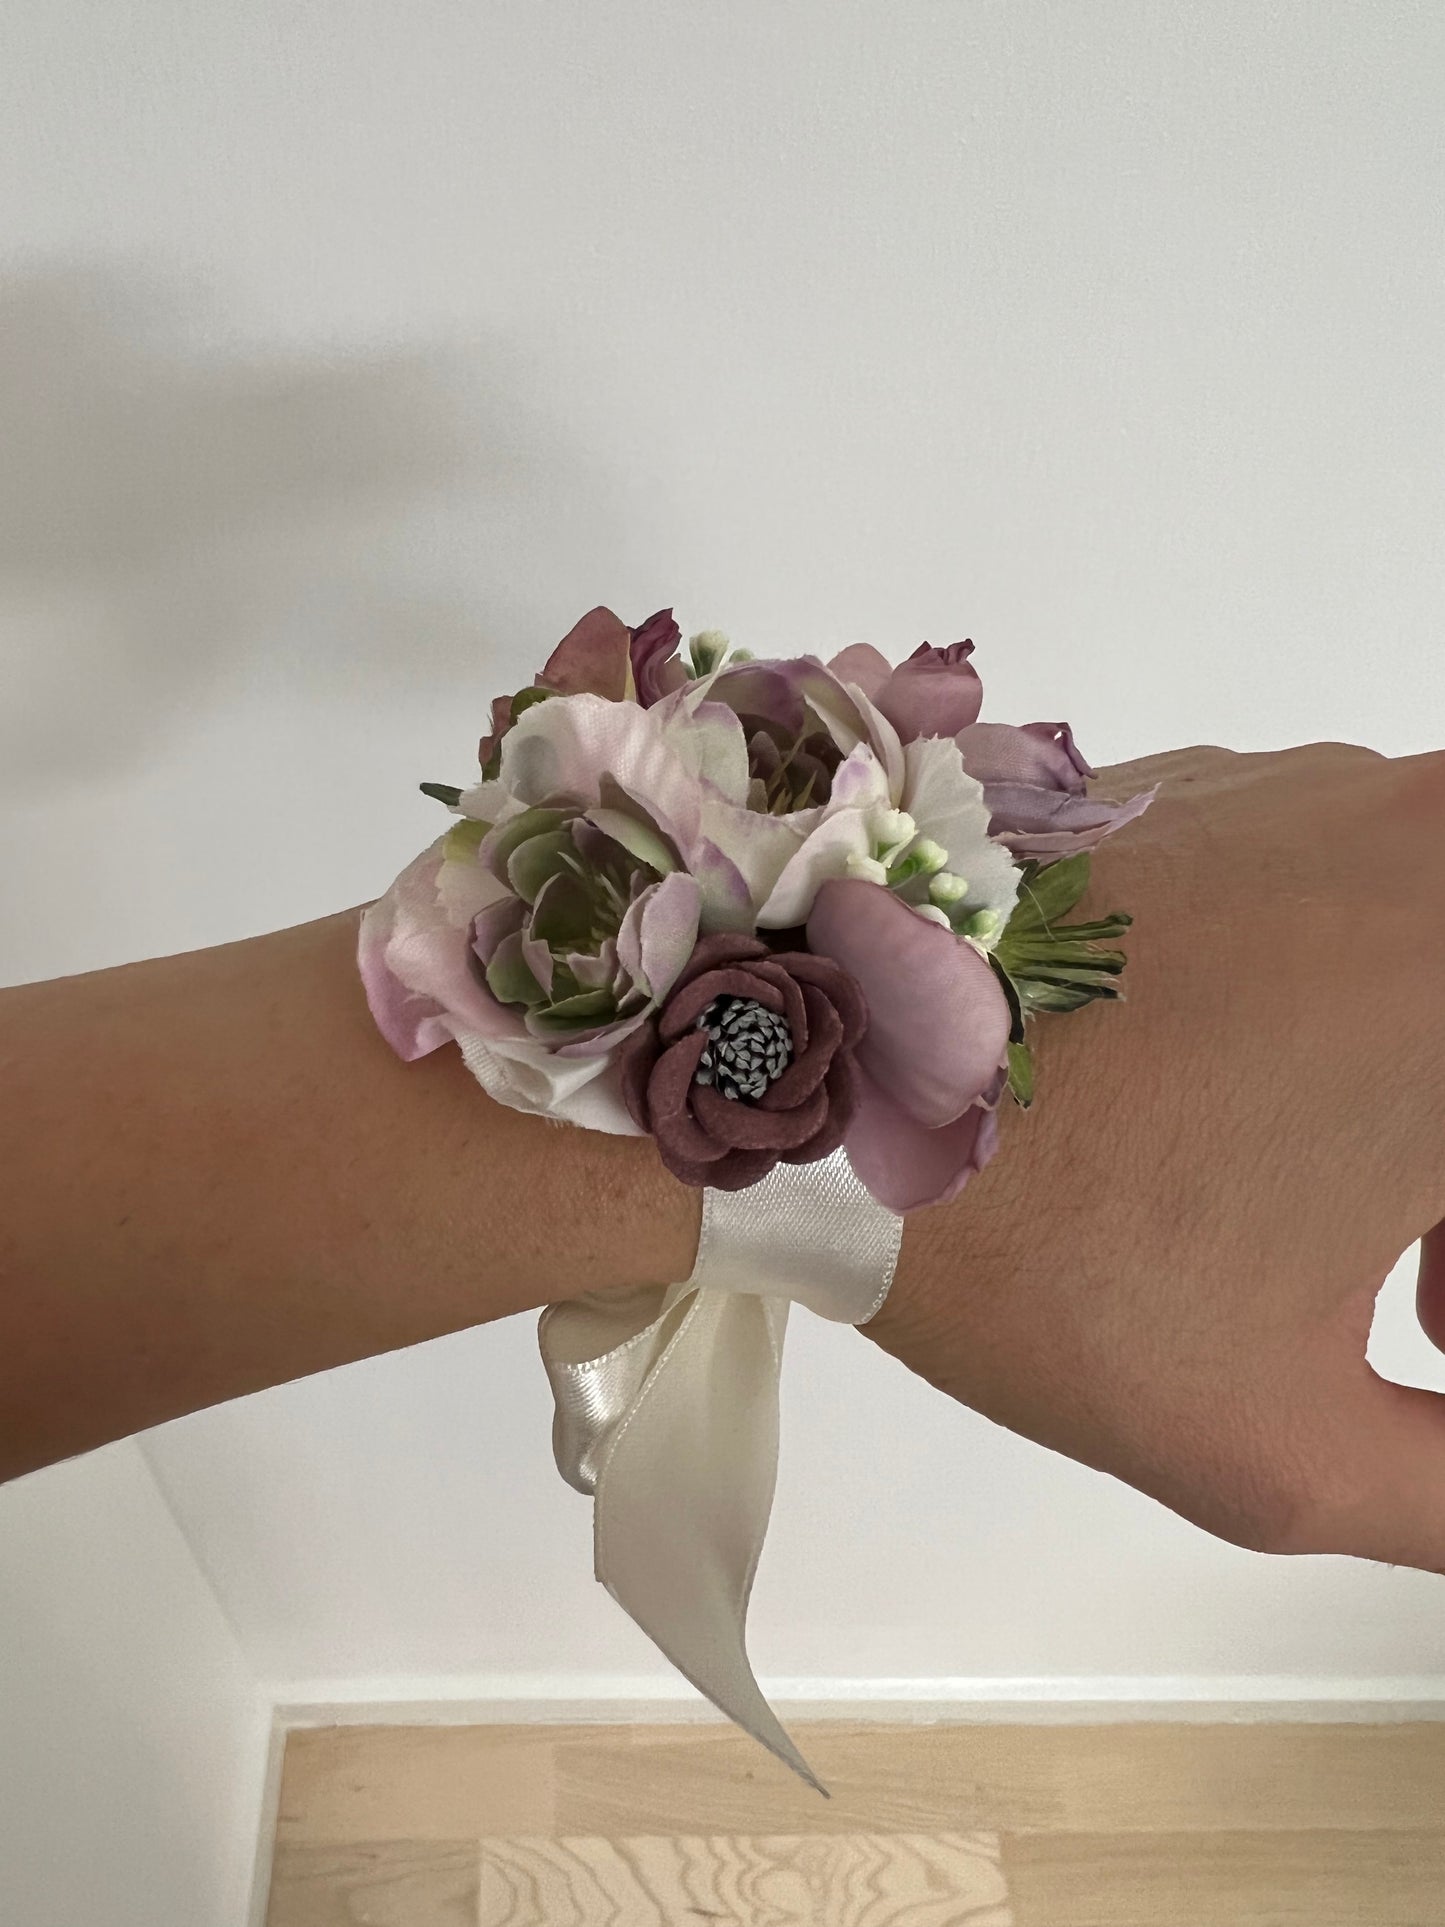 Floral wristband